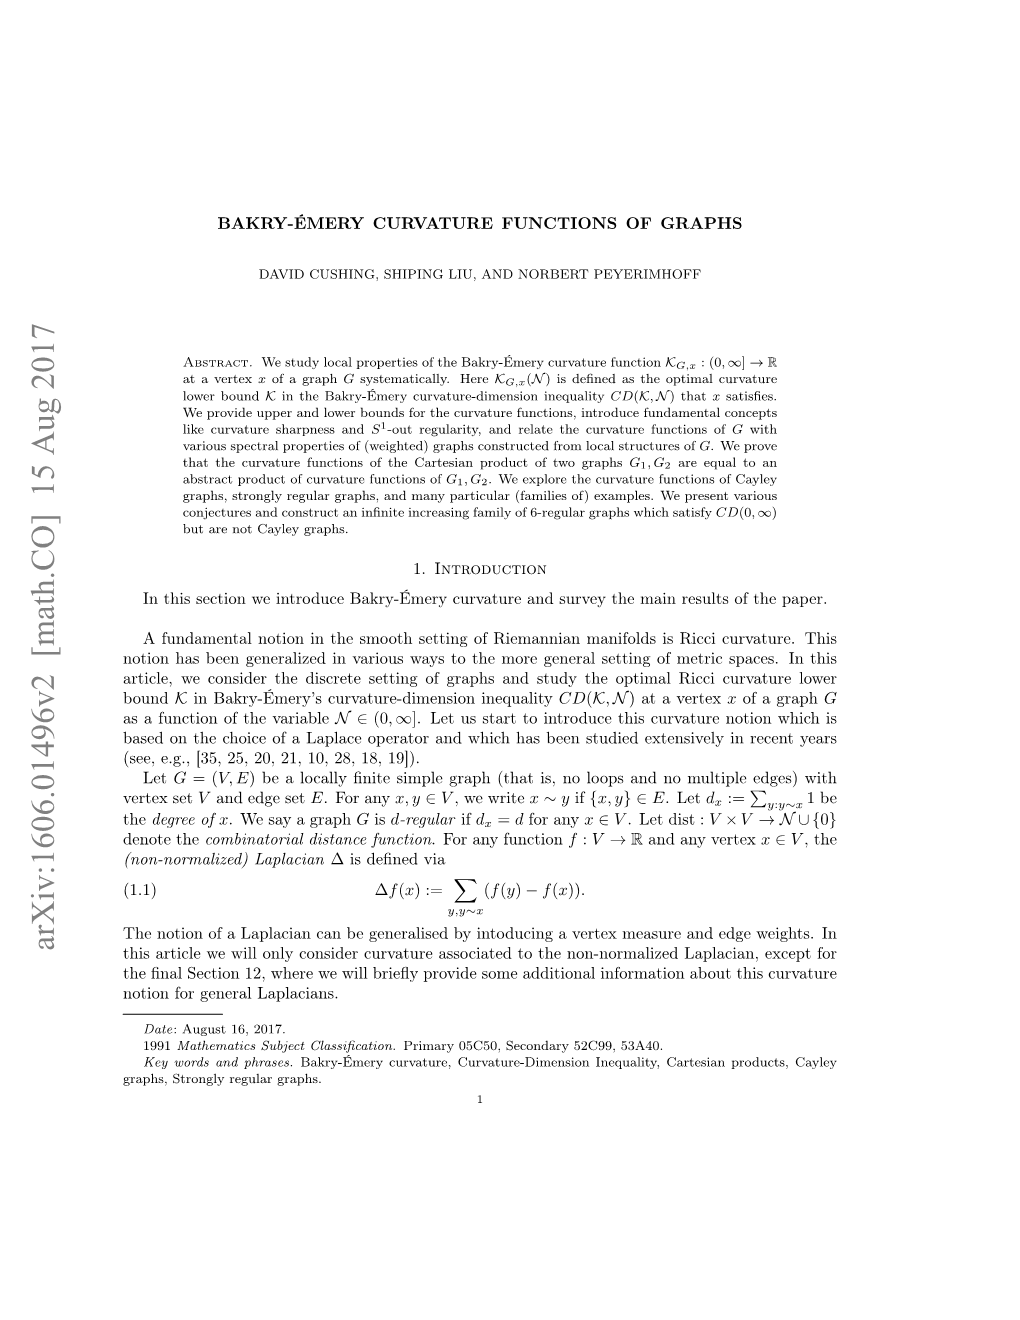 Bakry-\'Emery Curvature Functions of Graphs